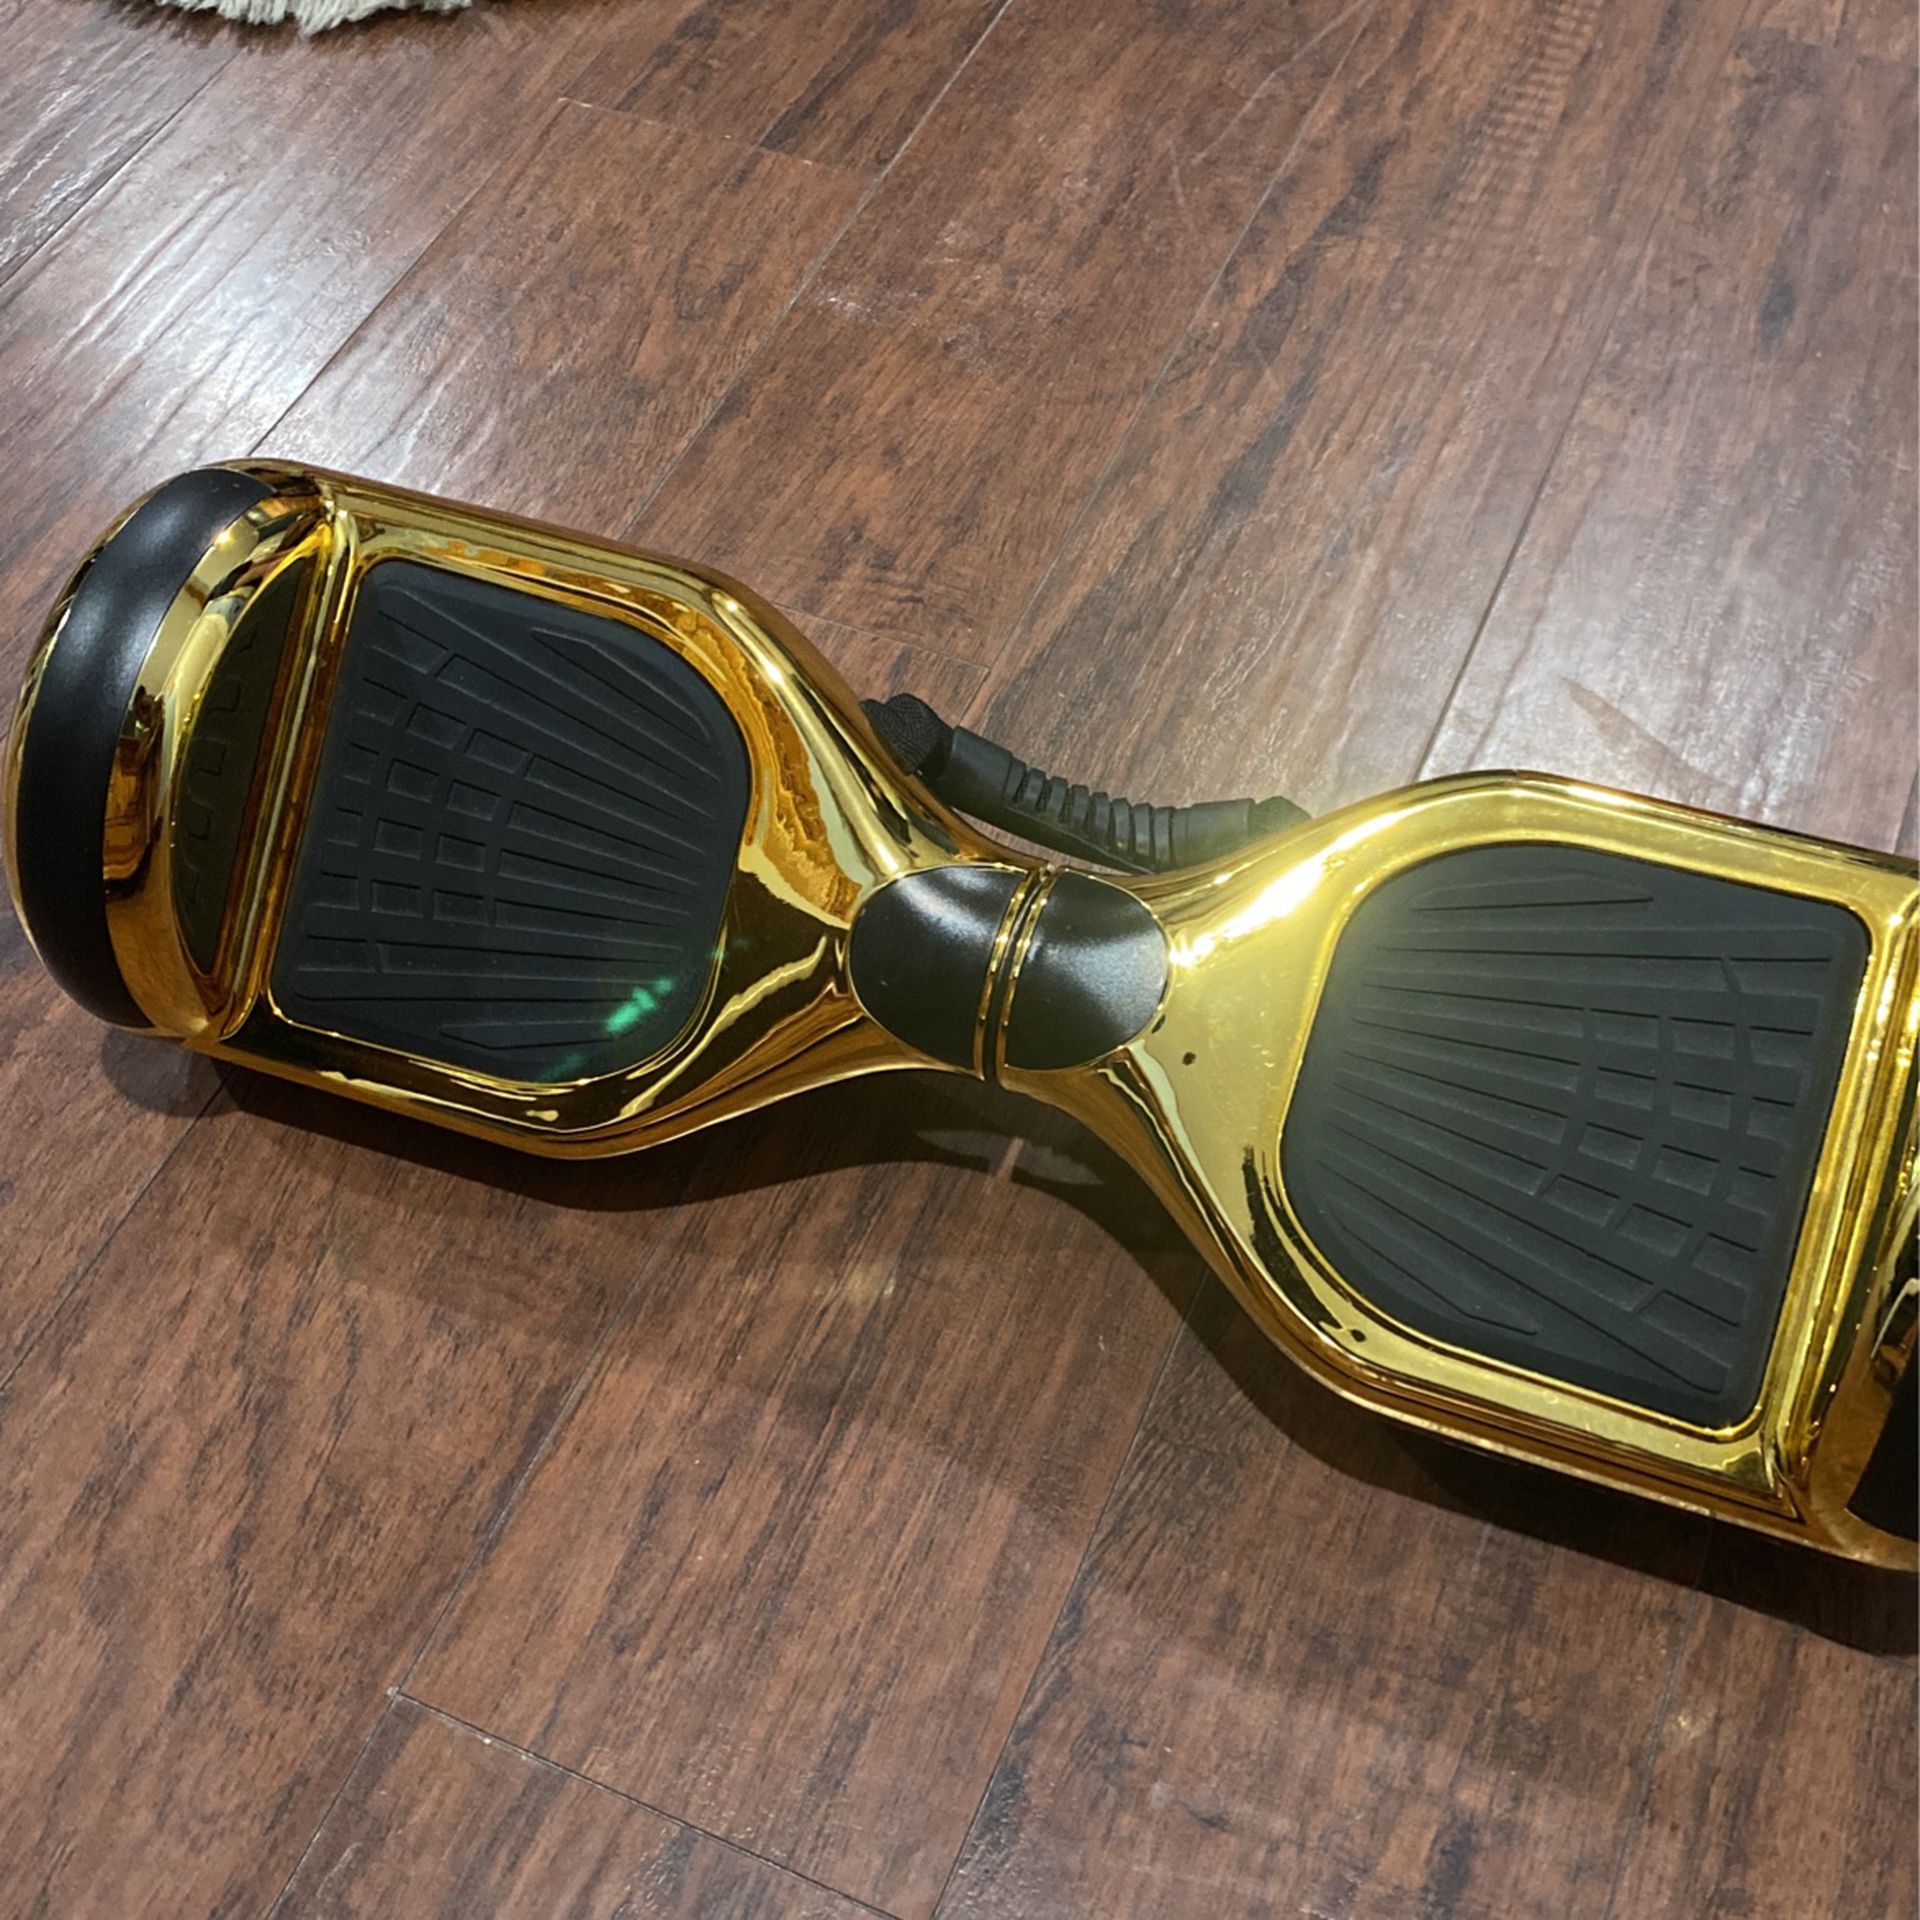 Bluetooth Hoverboard 